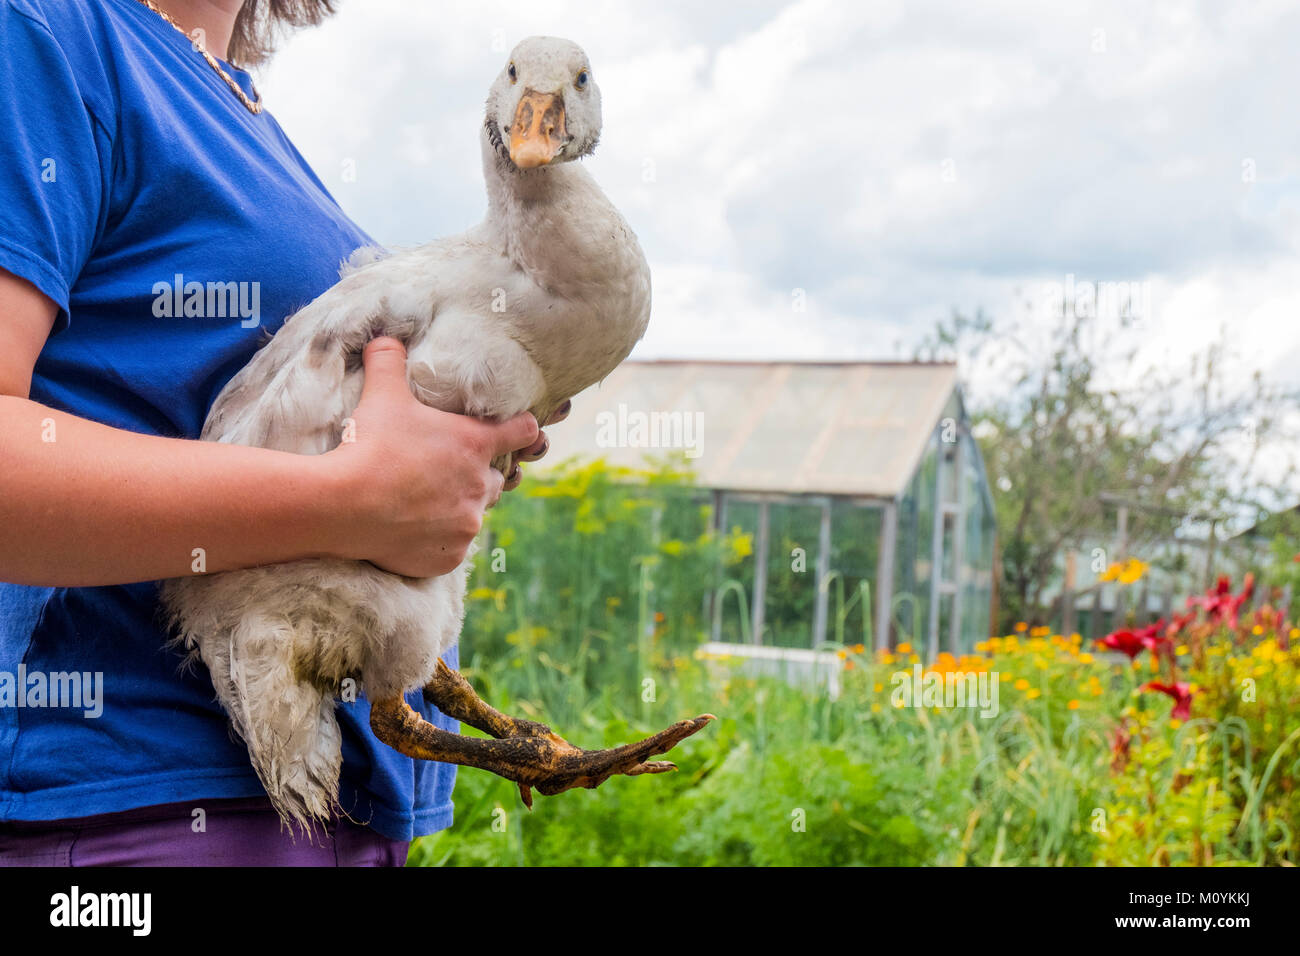 Close up of woman holding duck on farm Banque D'Images